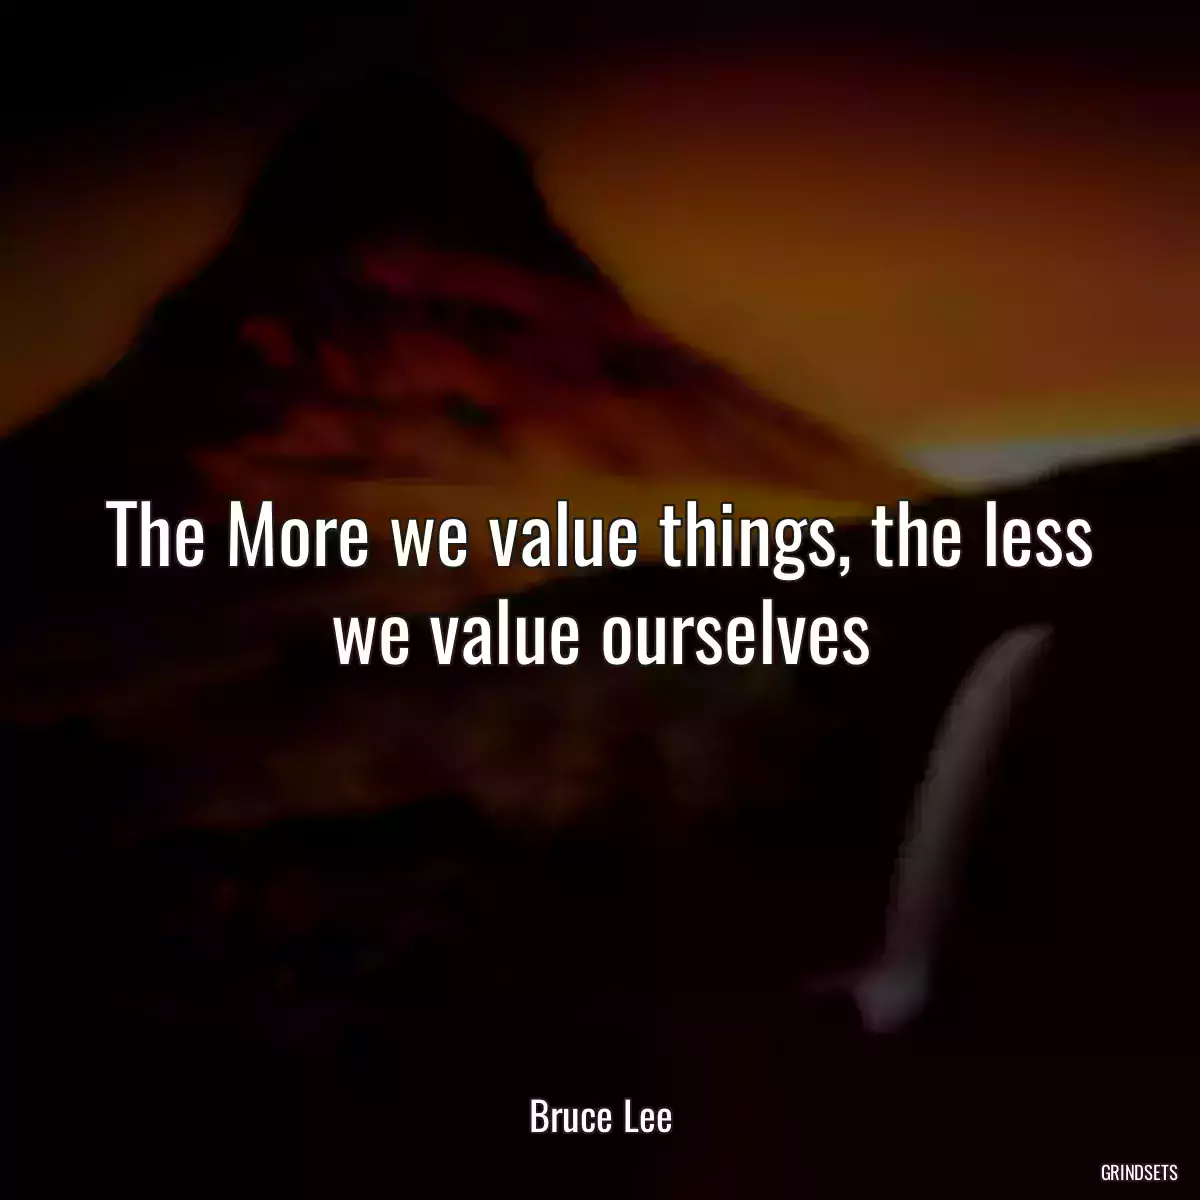 The More we value things, the less we value ourselves